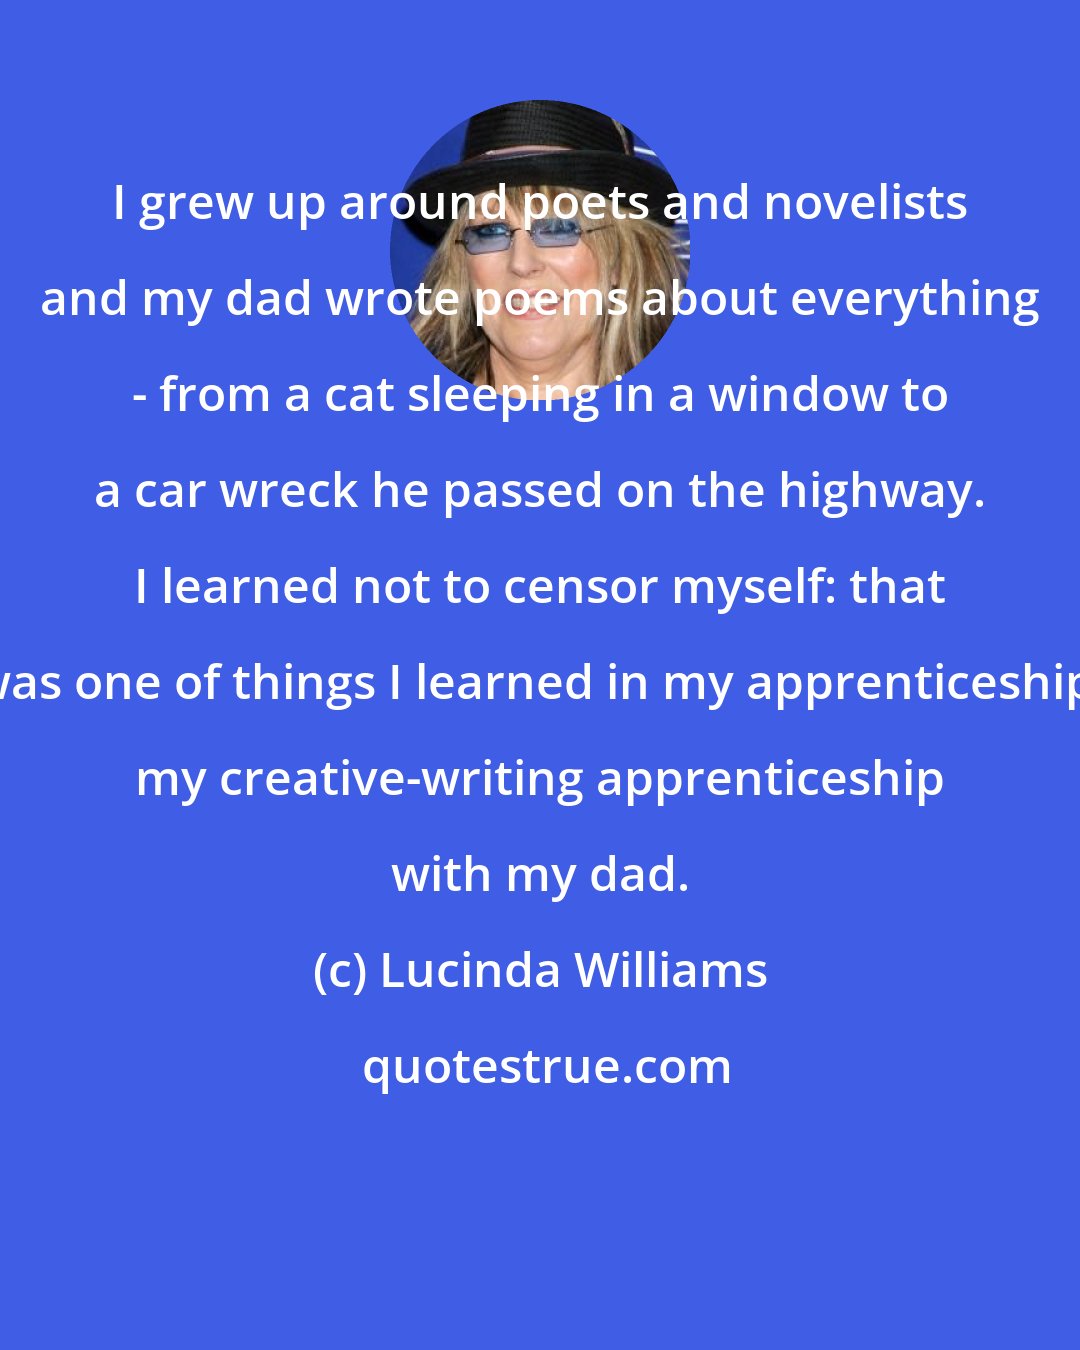 Lucinda Williams: I grew up around poets and novelists and my dad wrote poems about everything - from a cat sleeping in a window to a car wreck he passed on the highway. I learned not to censor myself: that was one of things I learned in my apprenticeship, my creative-writing apprenticeship with my dad.